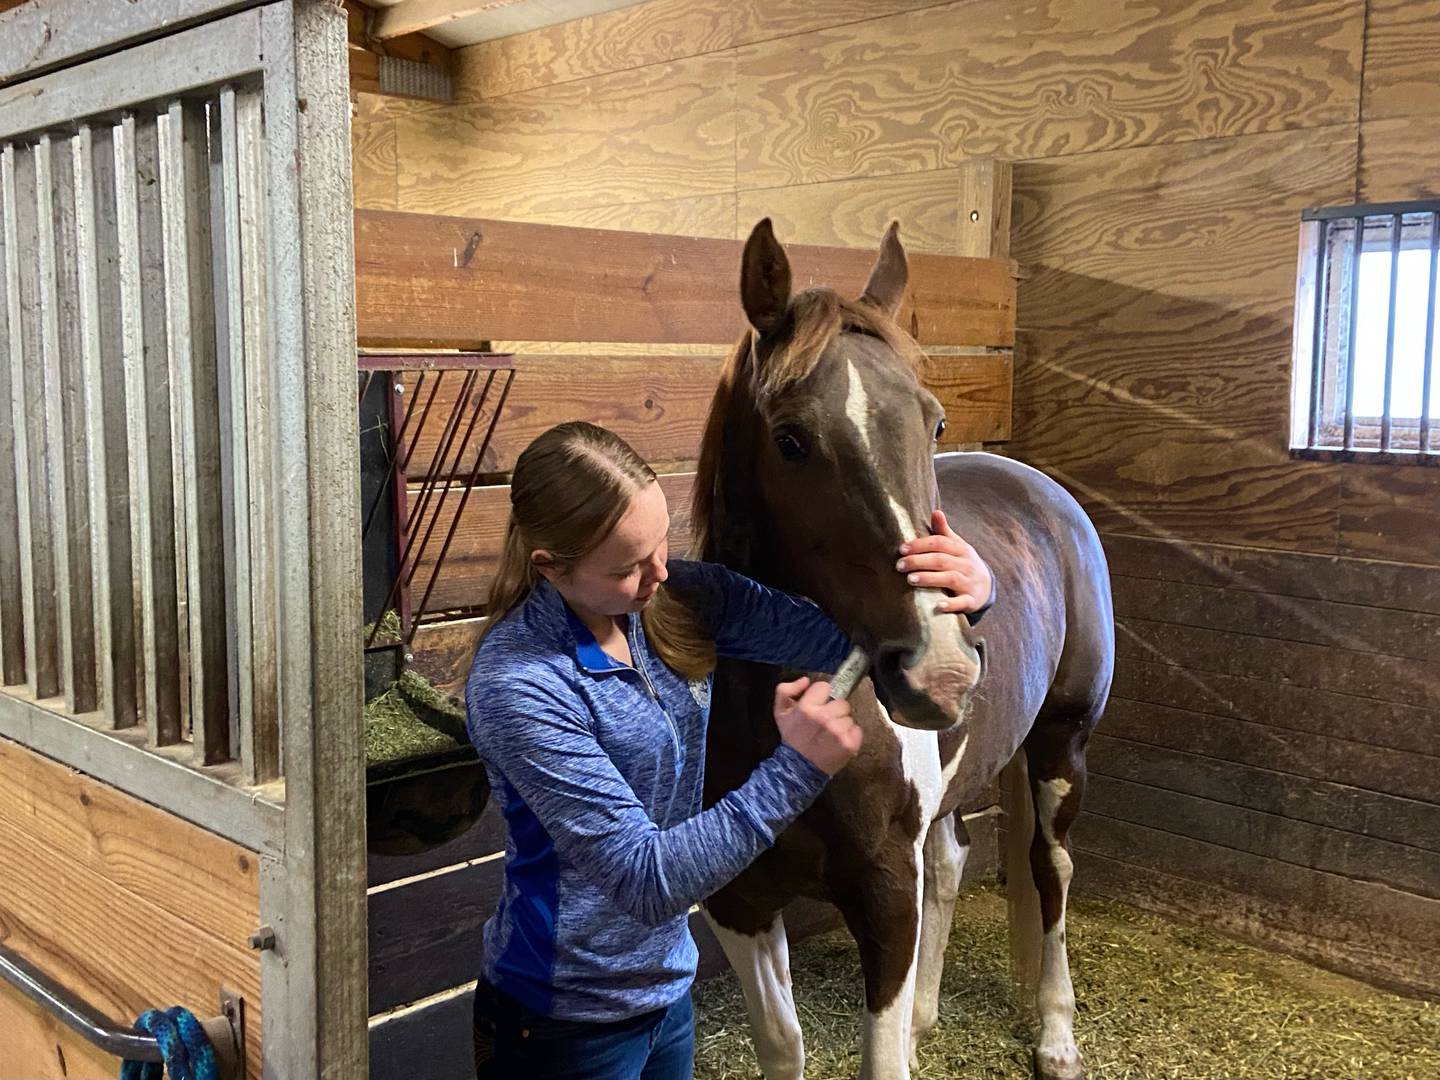 Ellorie Drach cares for her Paint mare named River that she competes with at rodeos on the local, state and national levels.